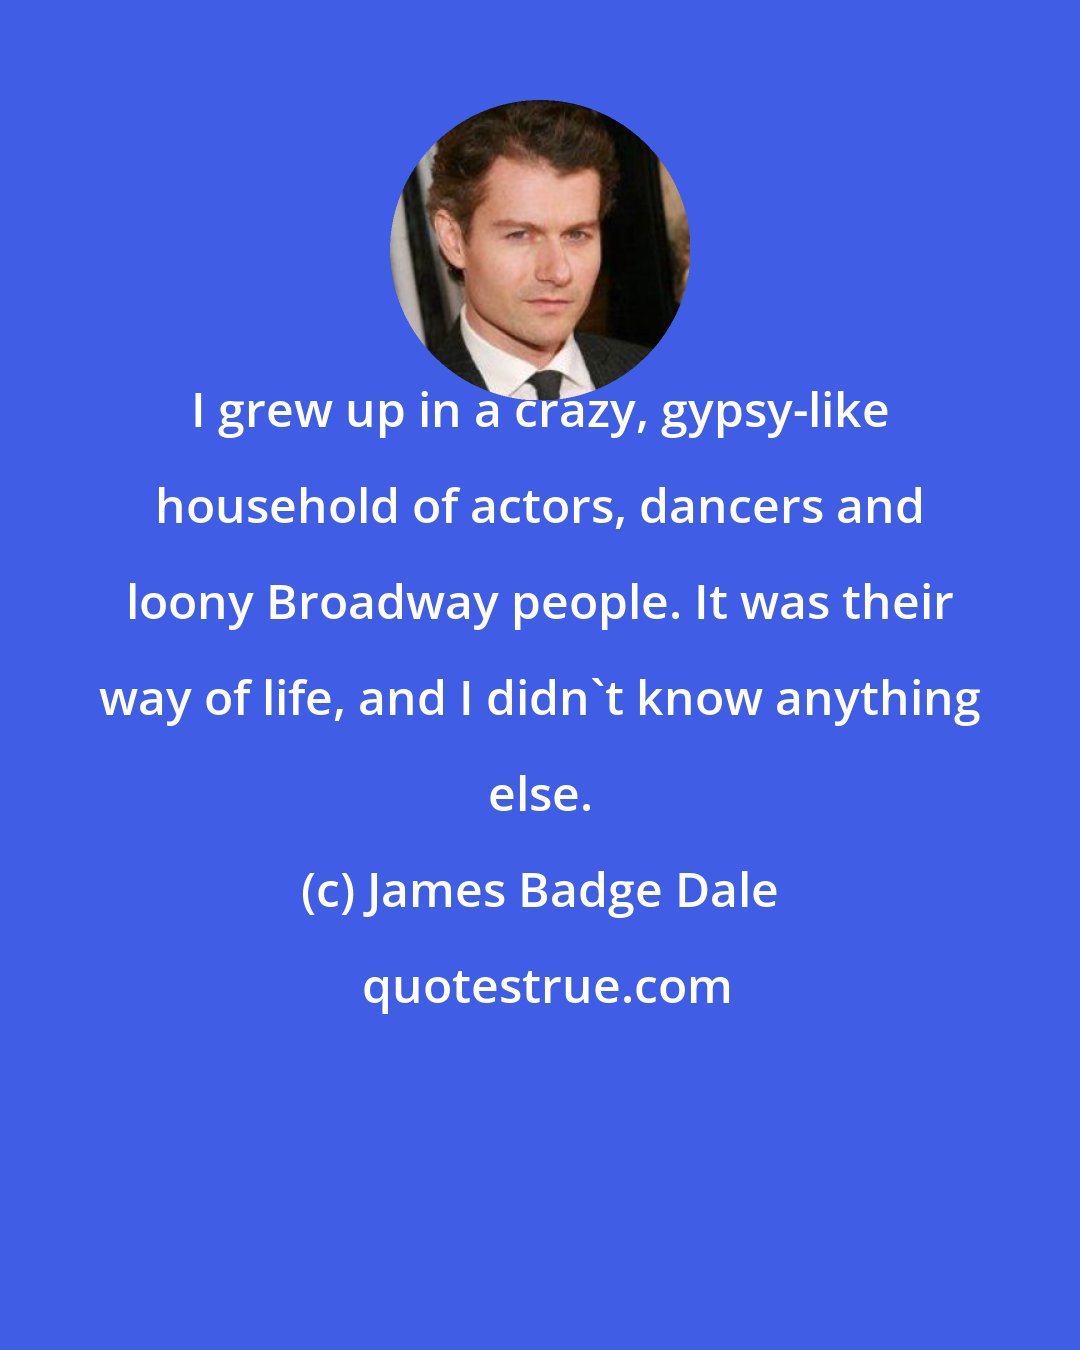 James Badge Dale: I grew up in a crazy, gypsy-like household of actors, dancers and loony Broadway people. It was their way of life, and I didn't know anything else.